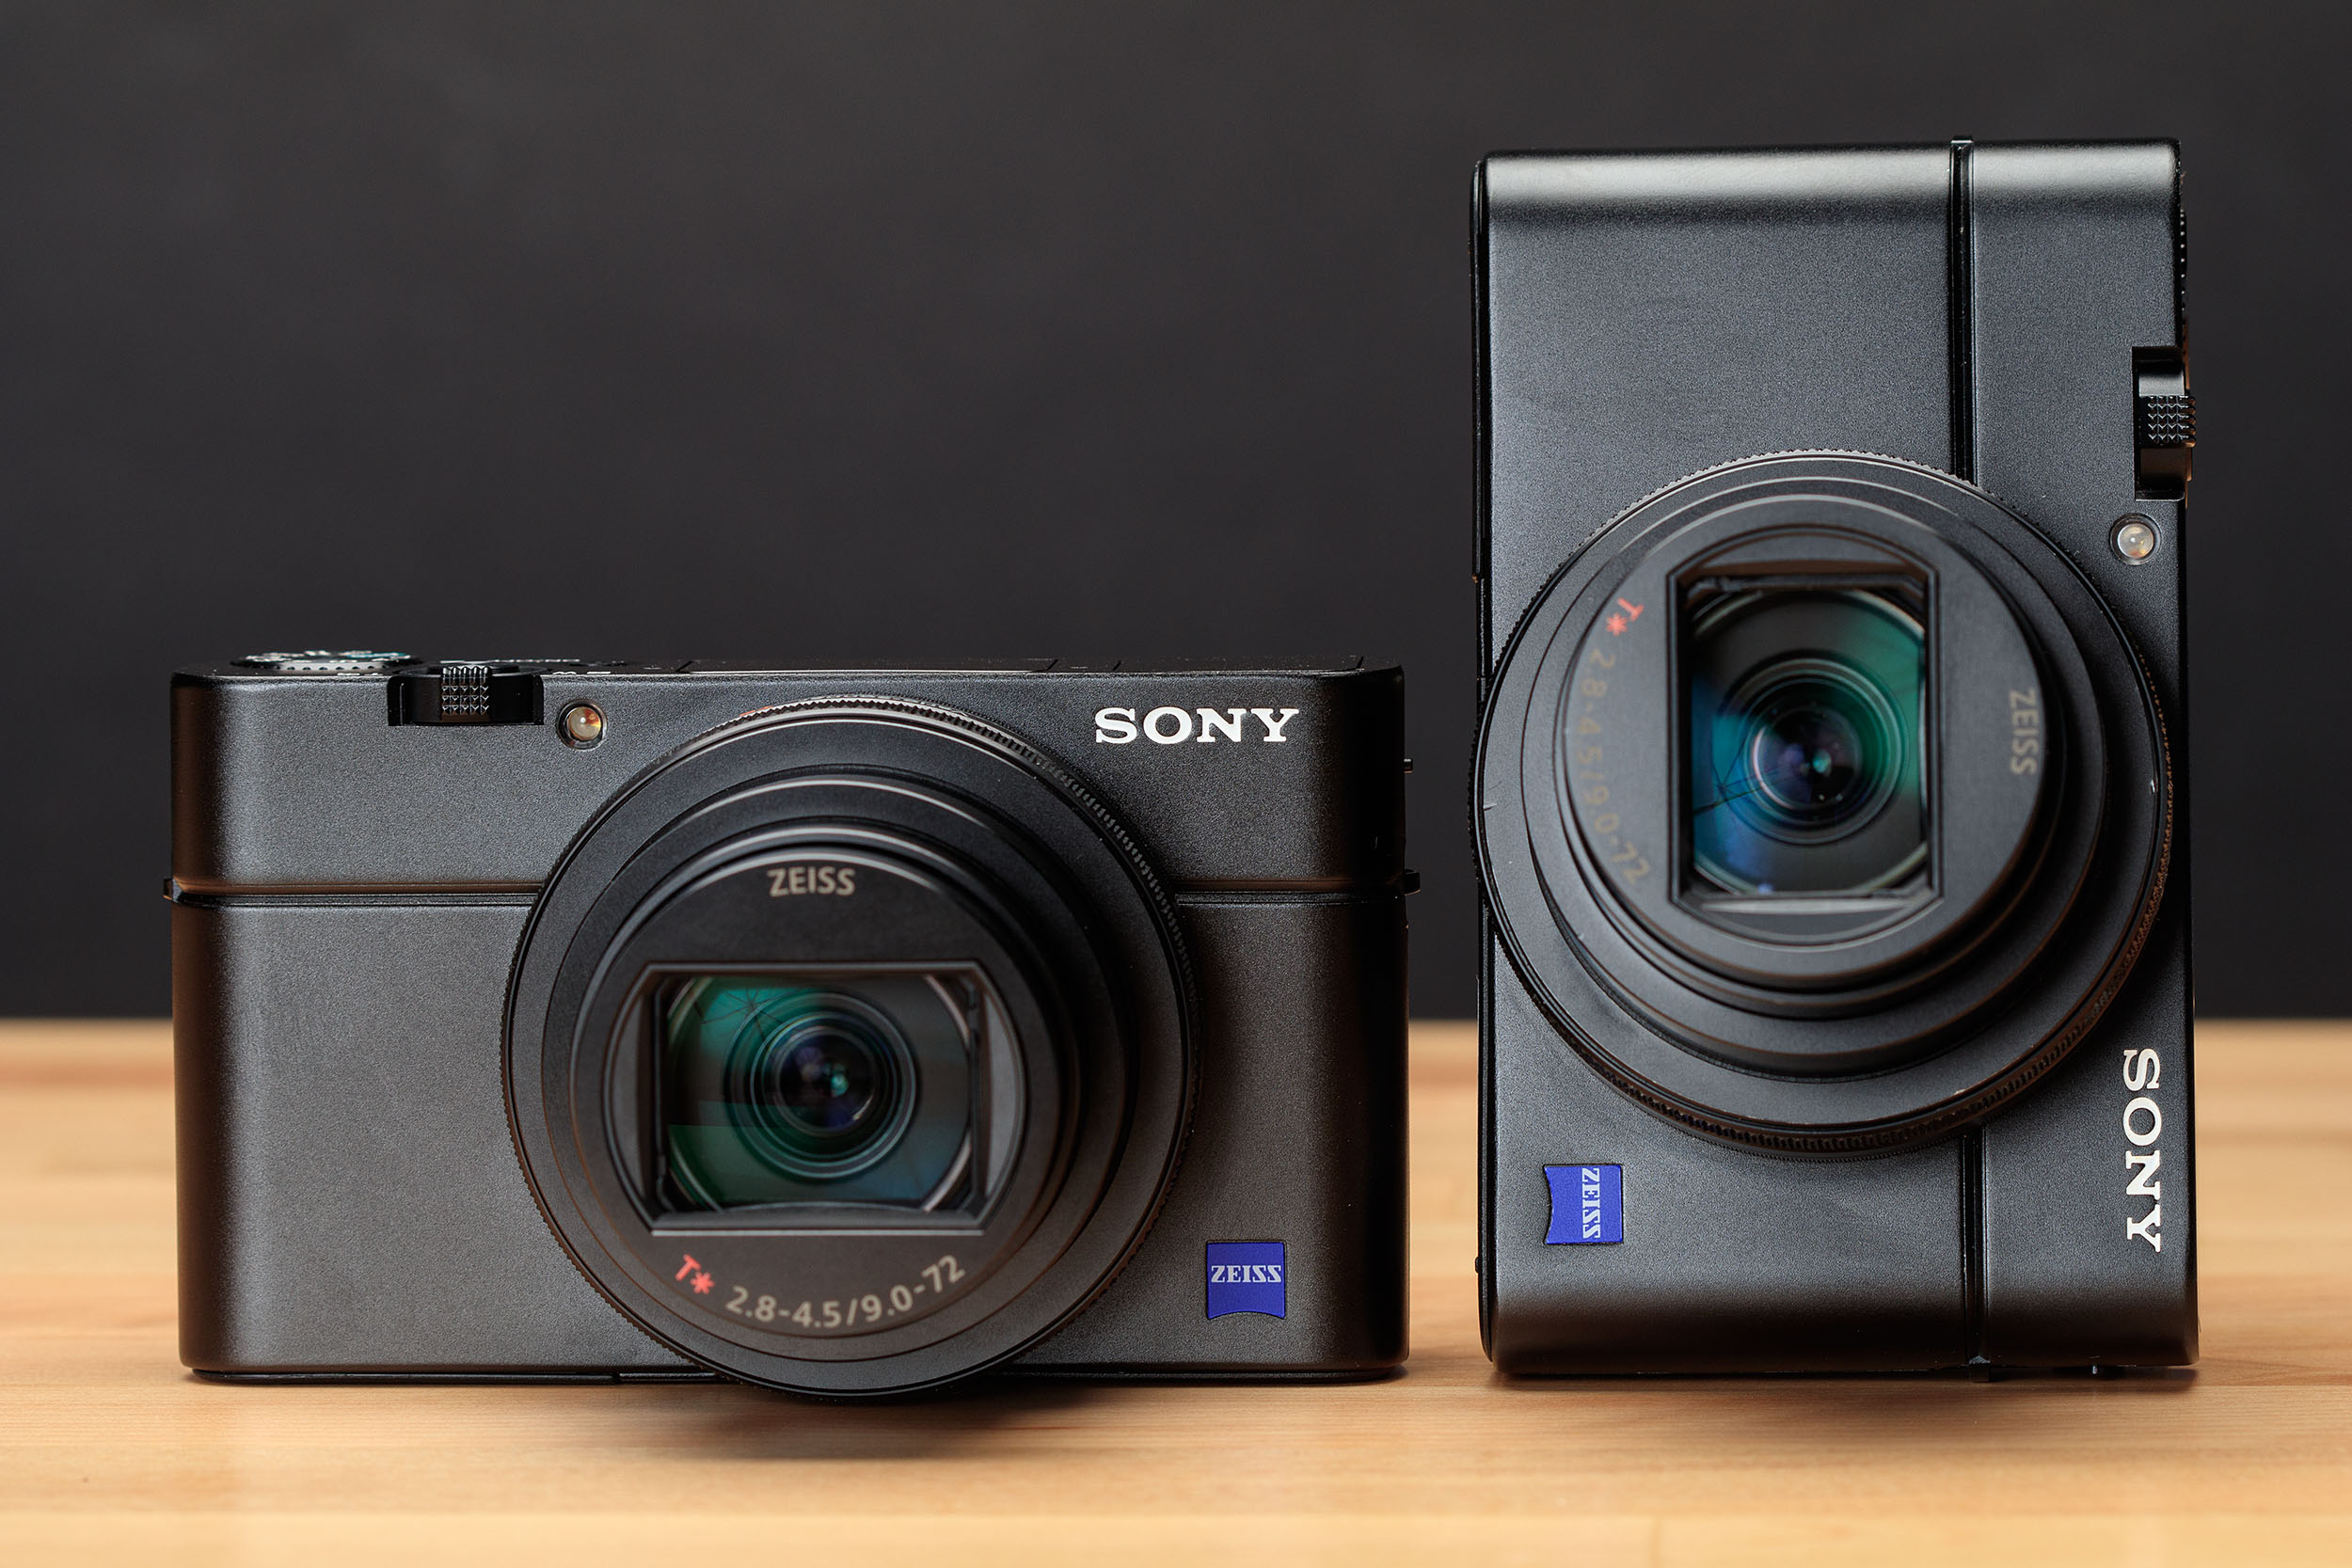 Compact cameras with the ability to record 4K video in Israel